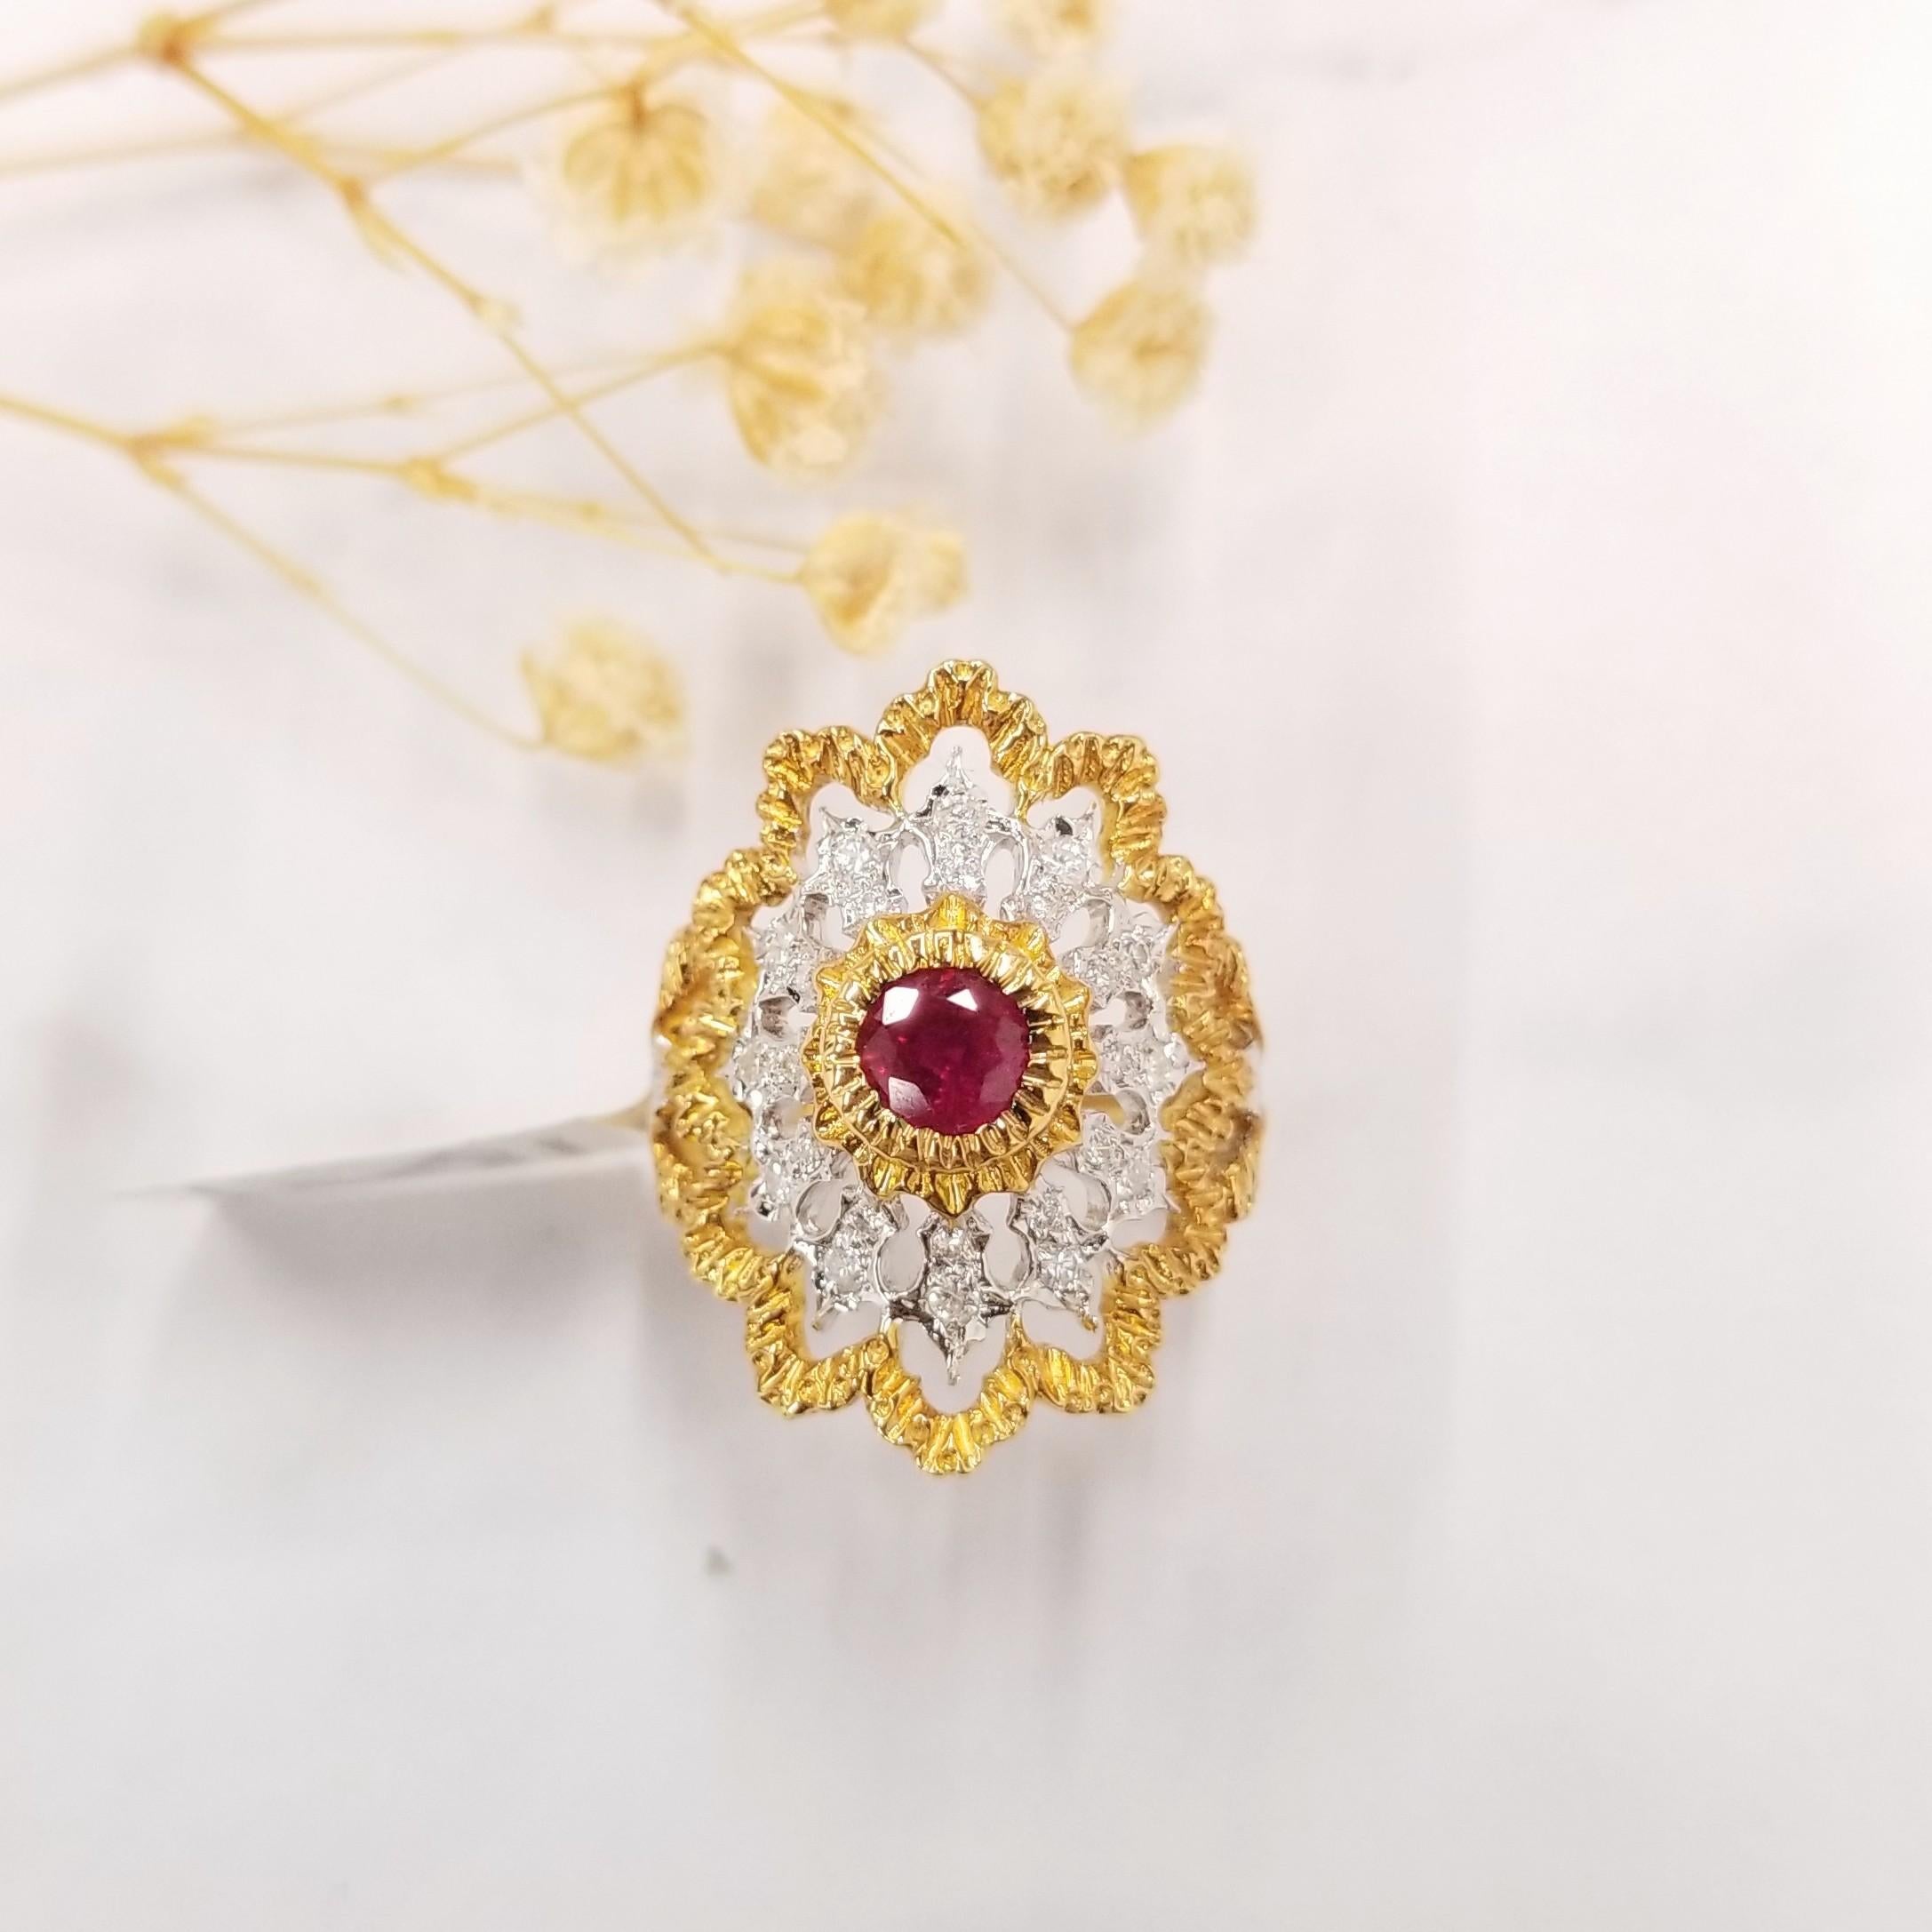 Burmese rubies are sought after for their beautiful red tones. This 18k white gold ring featuring a 0.75 carat ruby ruby is a great example of the Burmese allure - deep red tone. Special set with round brilliant-cut diamonds, the total diamond